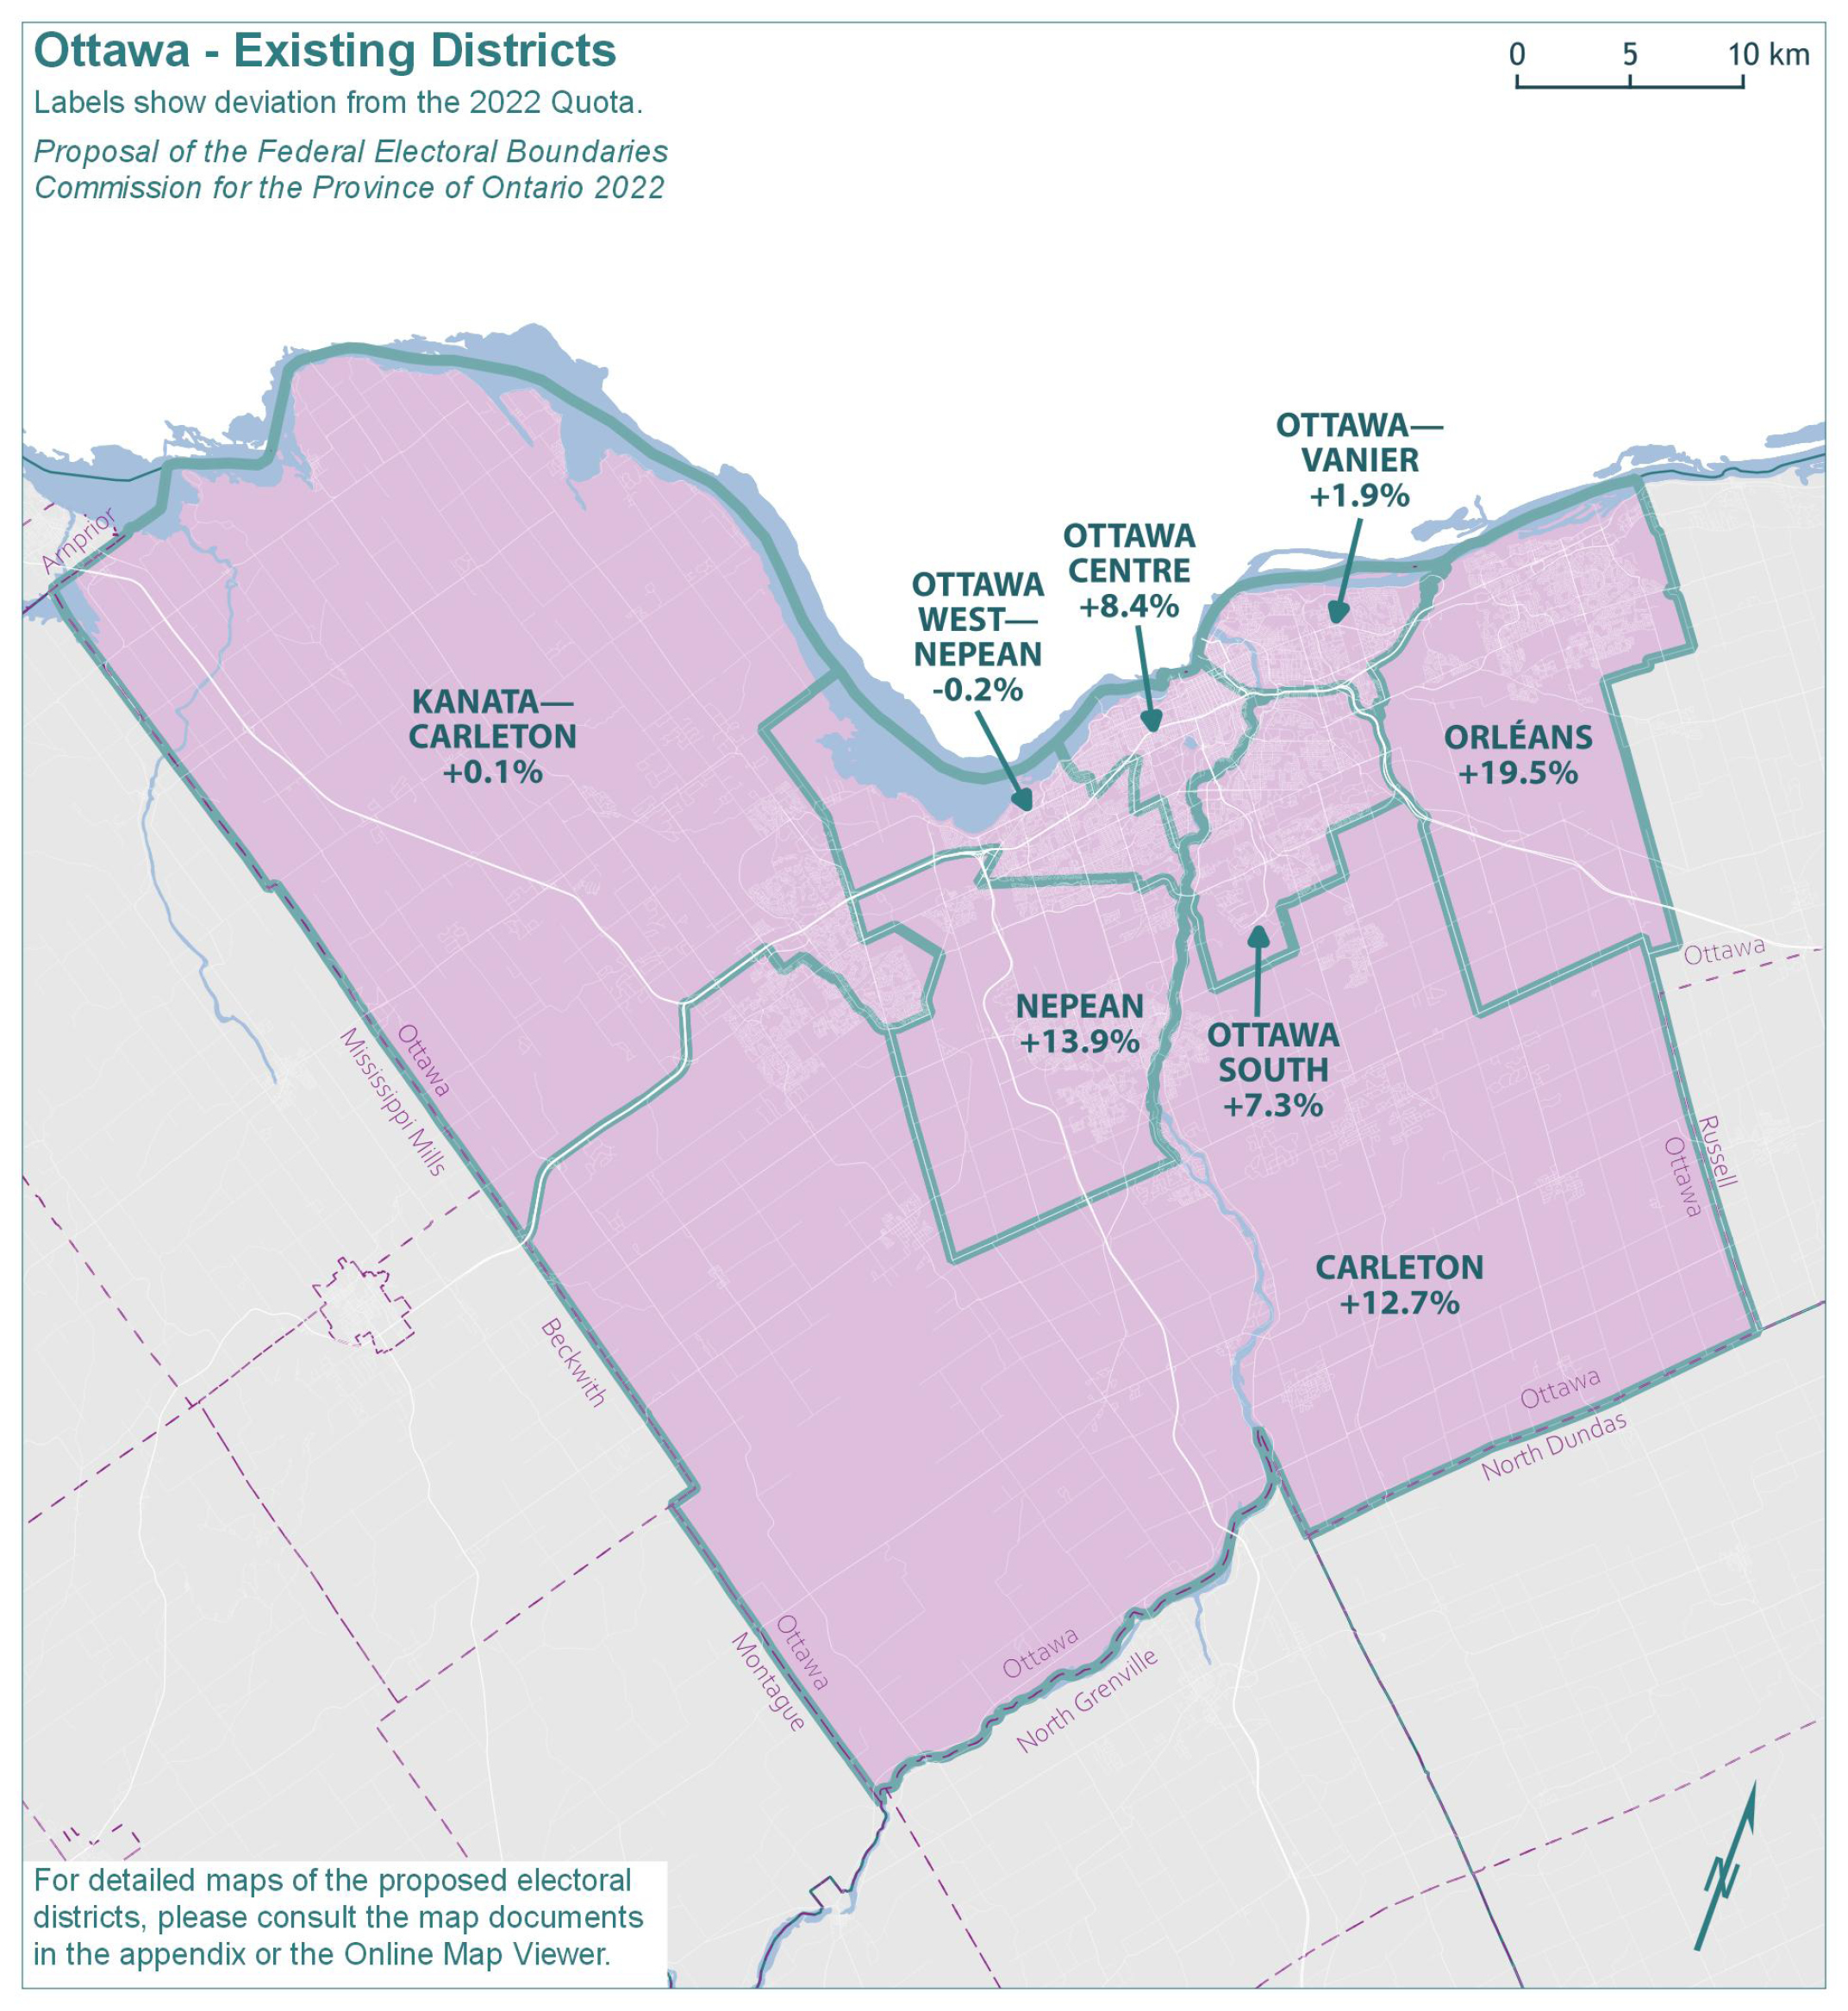 Ottawa - Existing Districts 